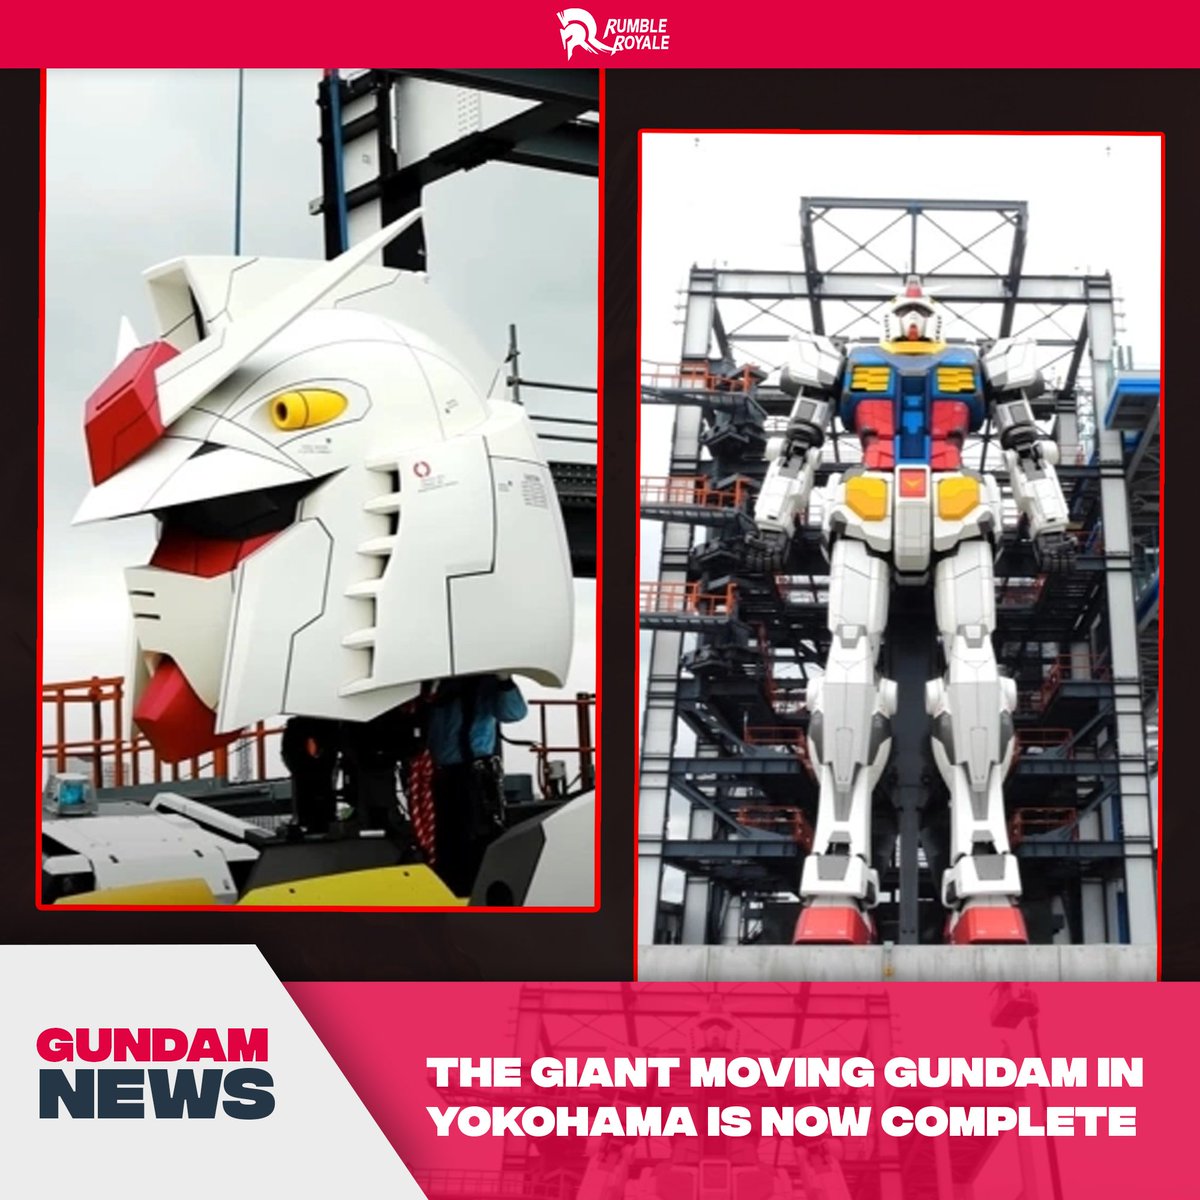 Rumble Royale Grandpa Rx 78 Gundam Roughly 55 Pounds This Life Size Gundam S External Construction Was Finished On July 29 In Yokohama The Grand Opening Will Be Sometime In October